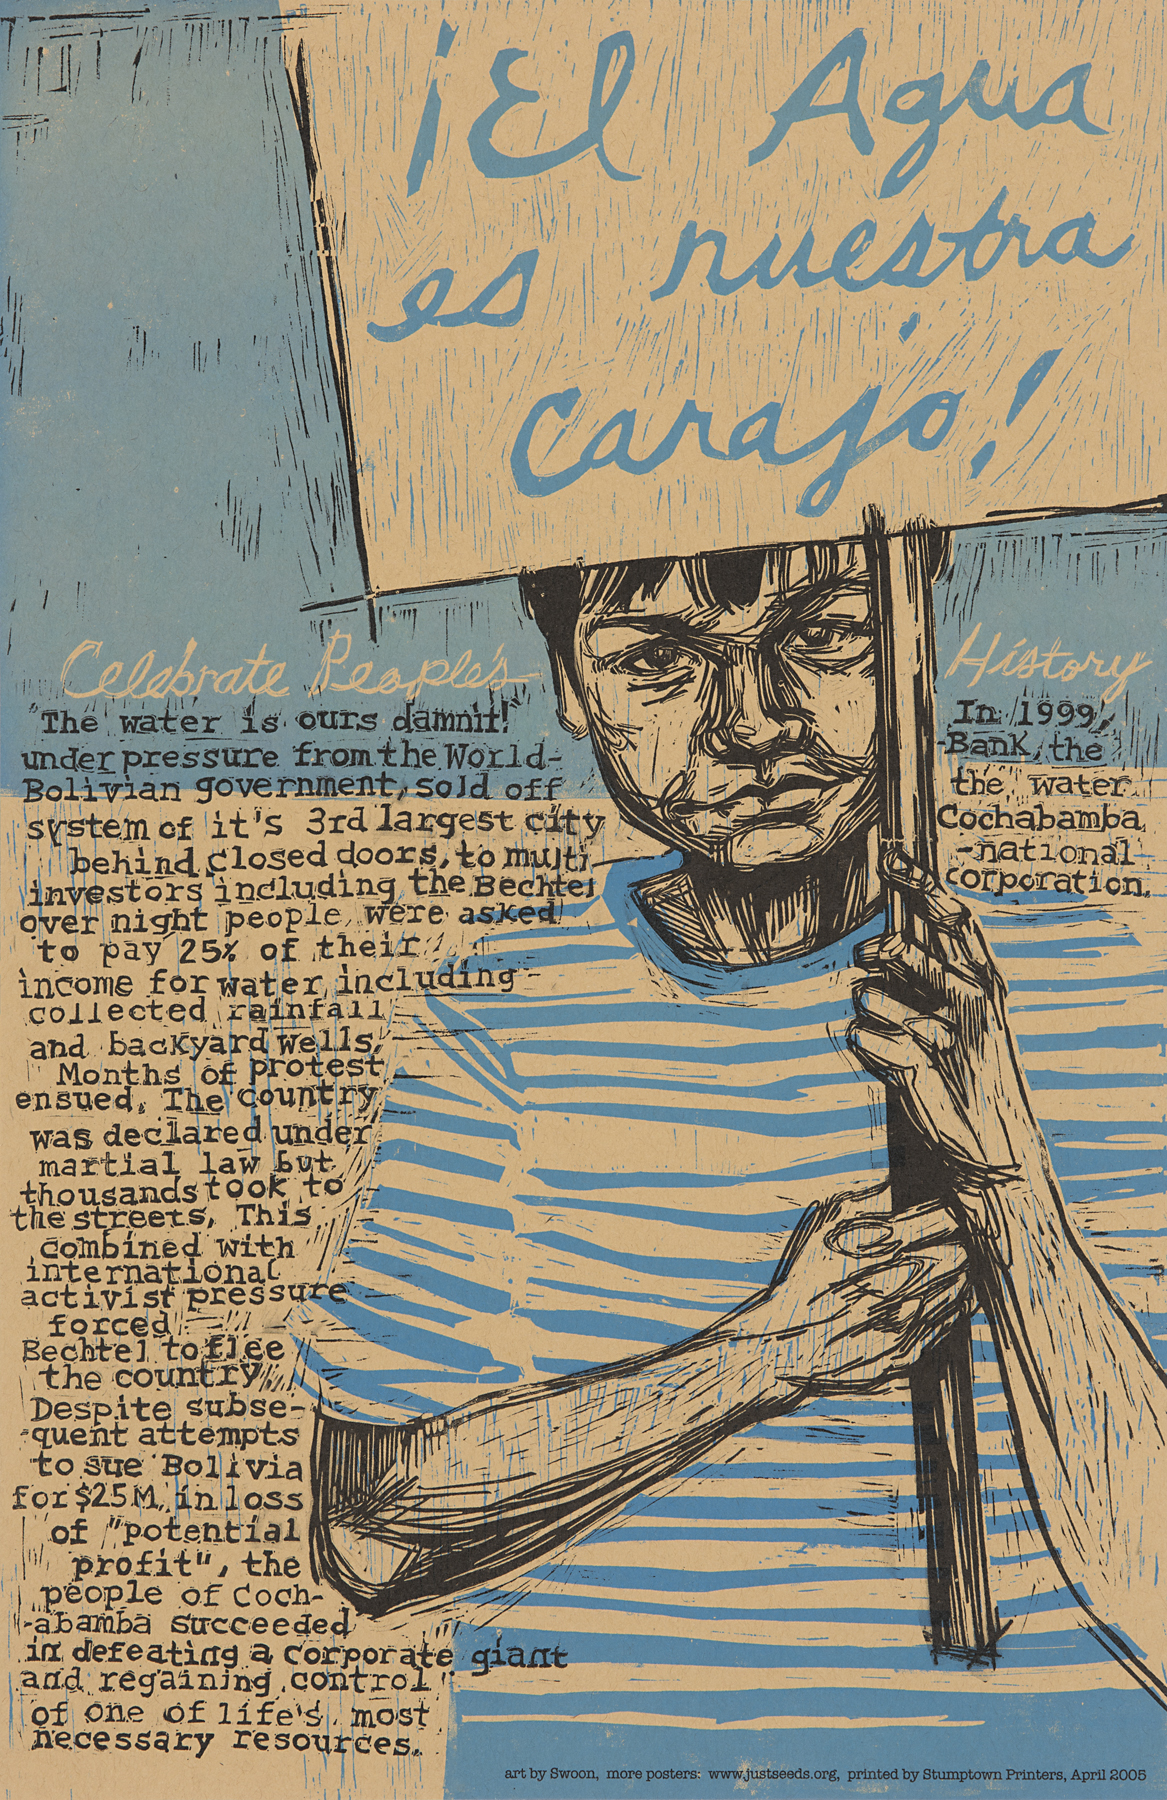 Illustration of figure in a striped shirt holding a sign, executed in black and blue. Descriptive text integrated into bottom half of image. Text describes the water crisis in the Bolivian city of Cochabamba in 1999.